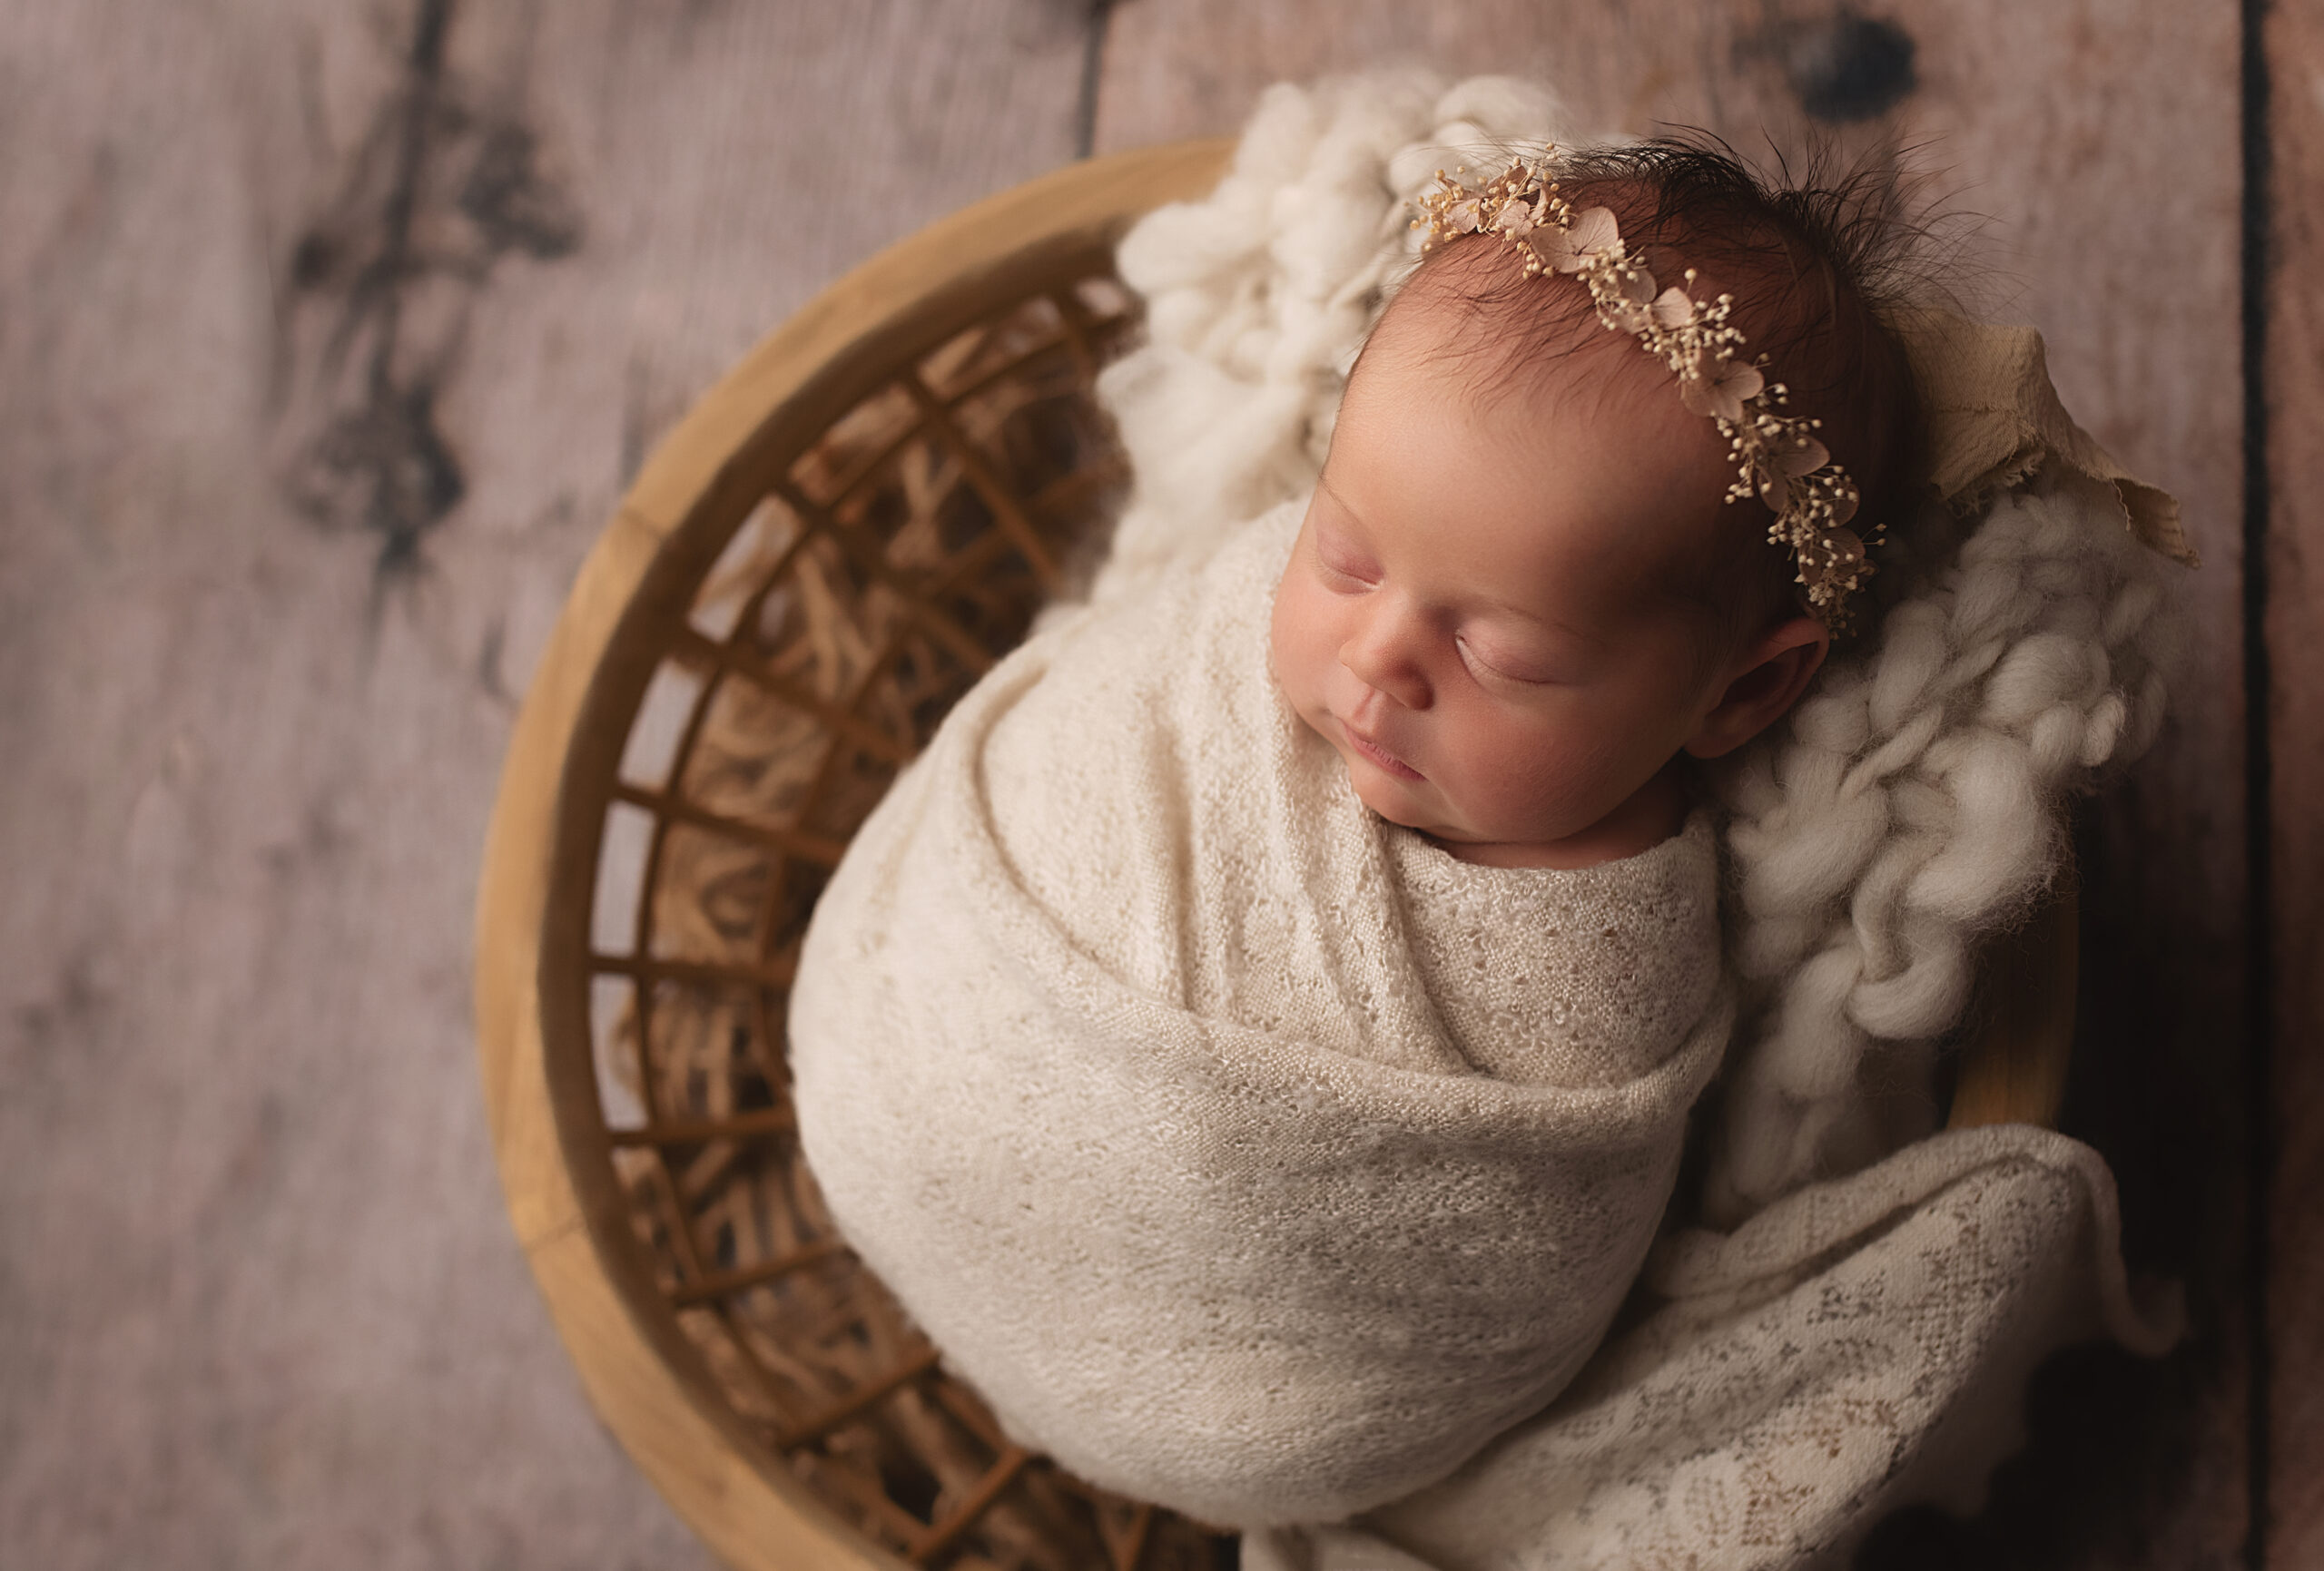 Grand rapids newborn photo shoot baby wrapped in cream swaddle in a basket